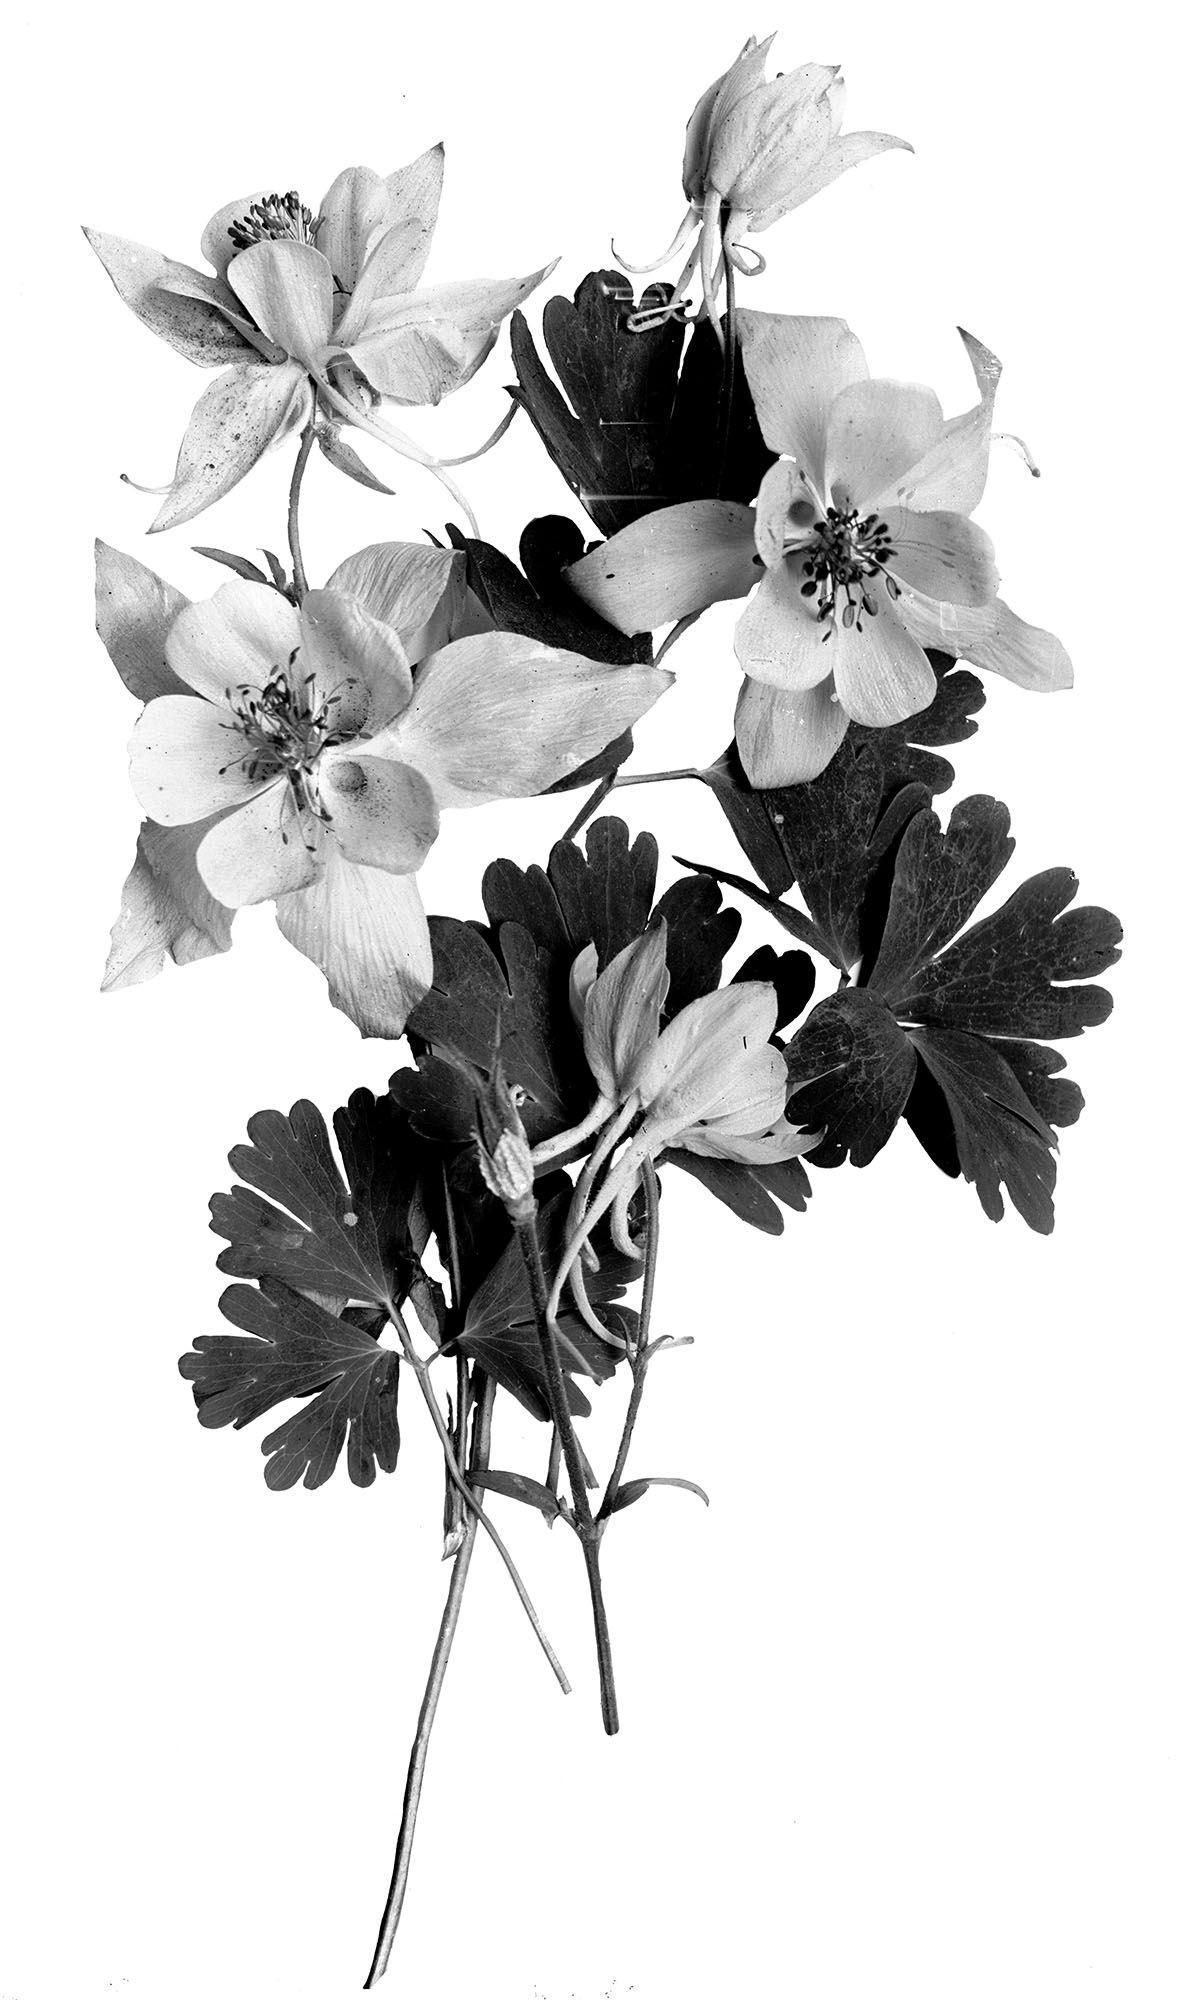 A black and white photos of a clipping of Columbine flowers and leaves.